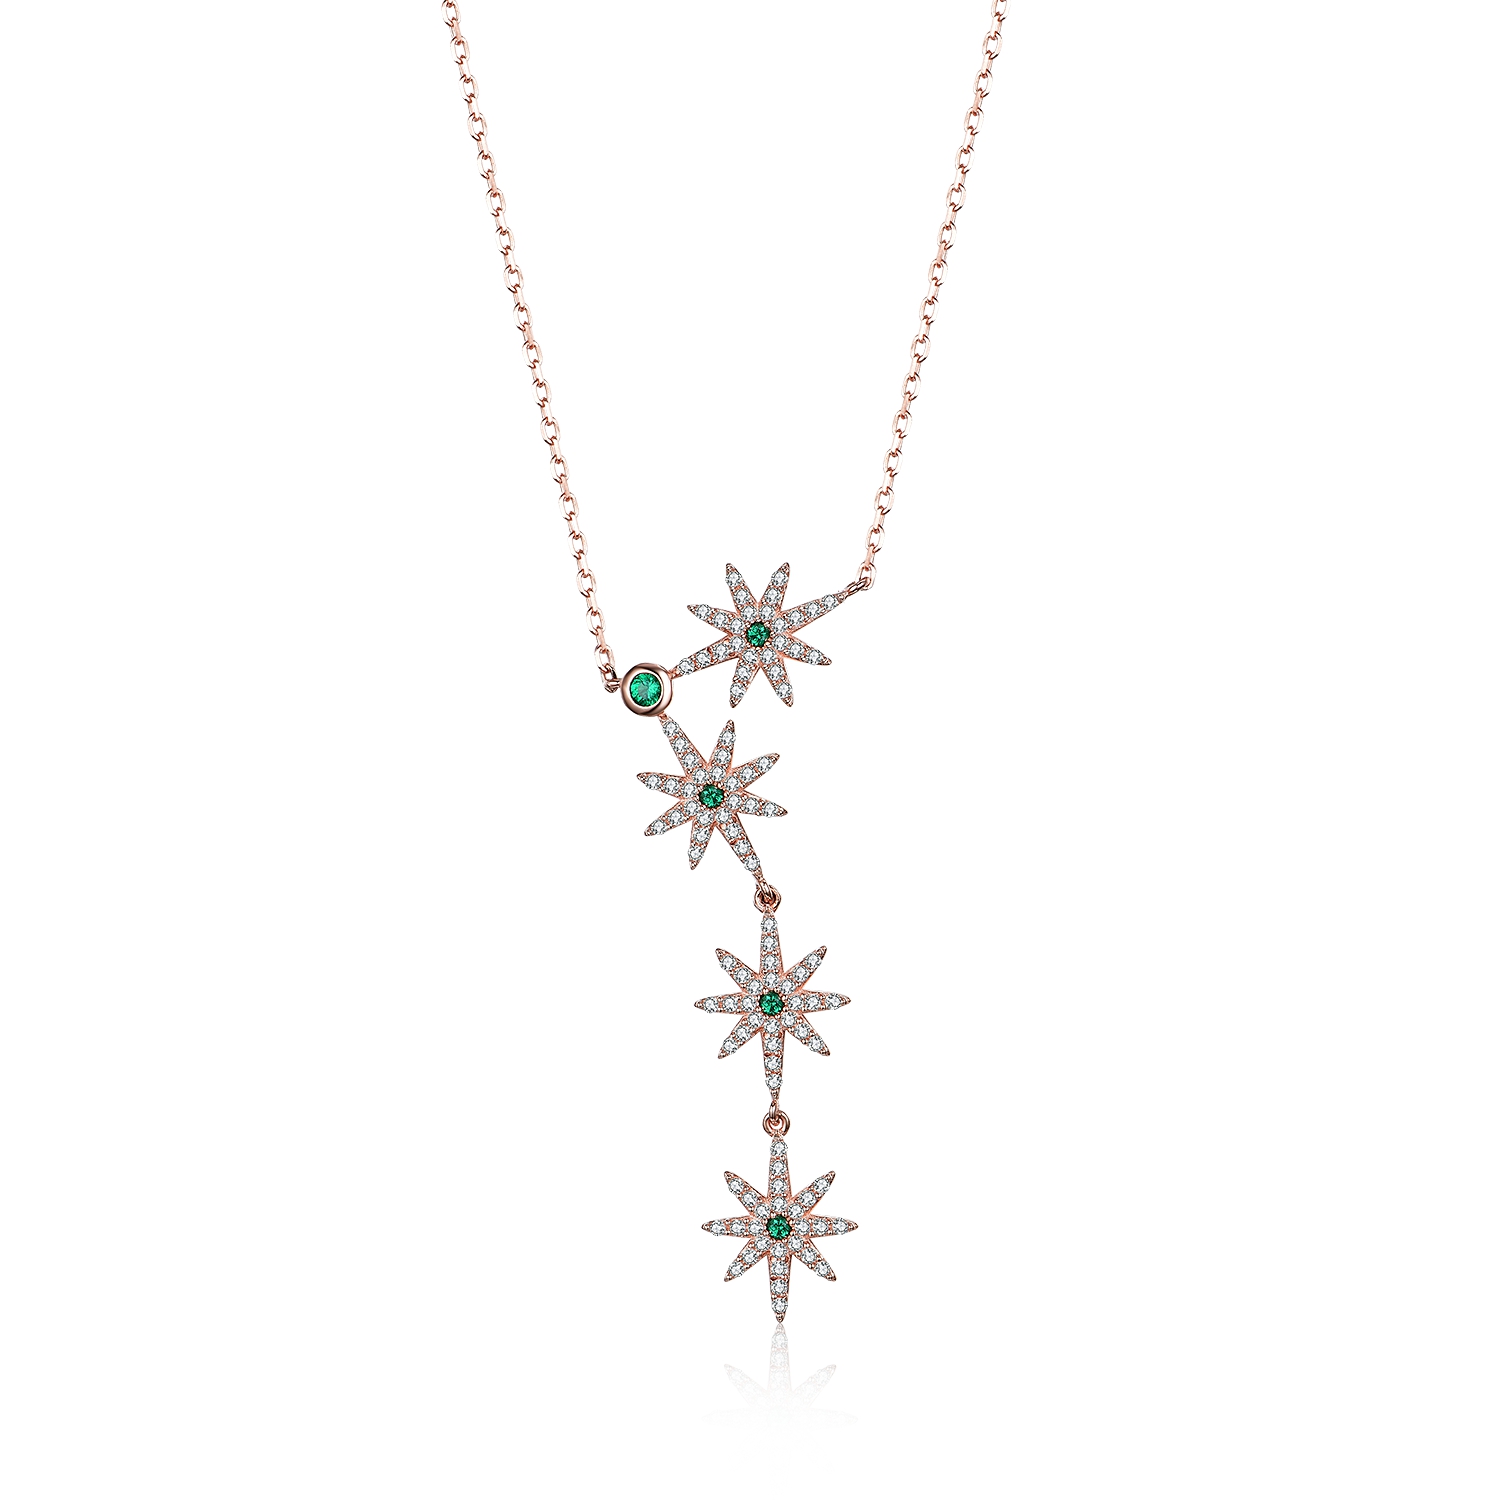 S925 Sterling Silver Long Chain Pendant Crystal Shiny Anise Pointed Star Jewelry Necklace With Bijoux